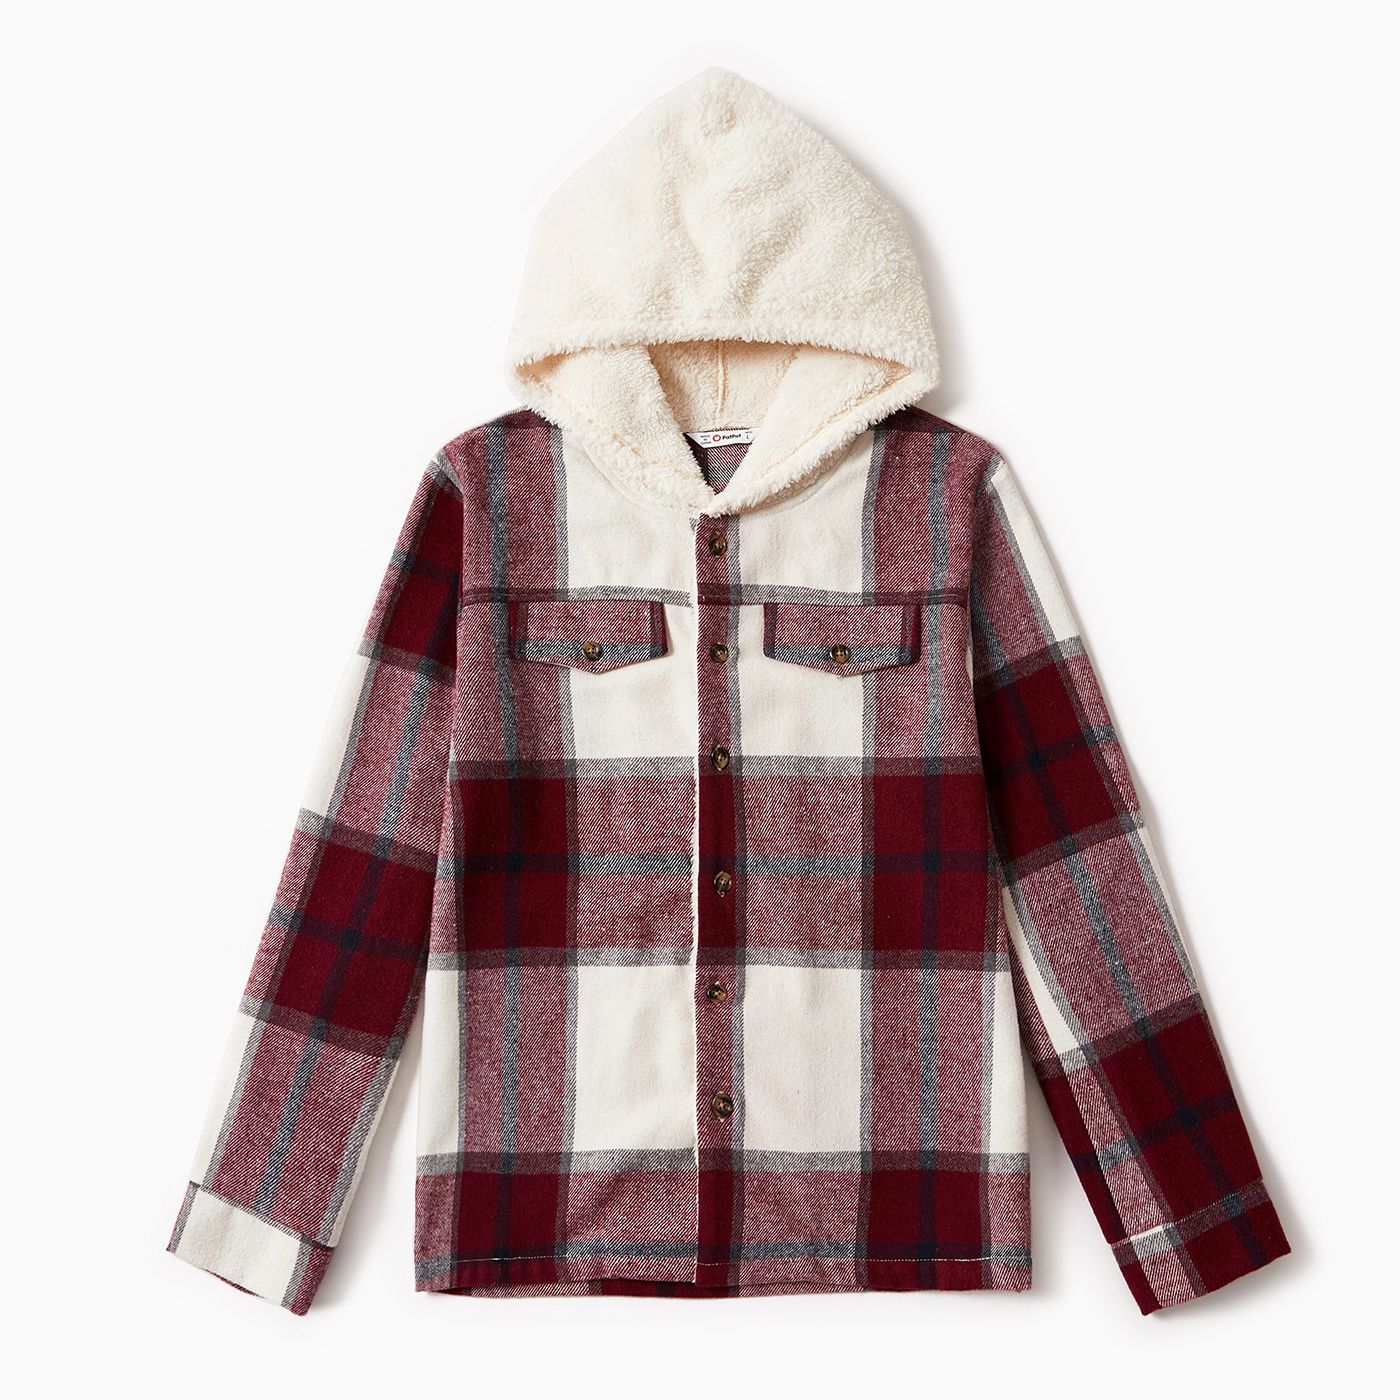 Family Matching Fleece Hooded Splicing Red Plaid Long-sleeve Outwear Tops